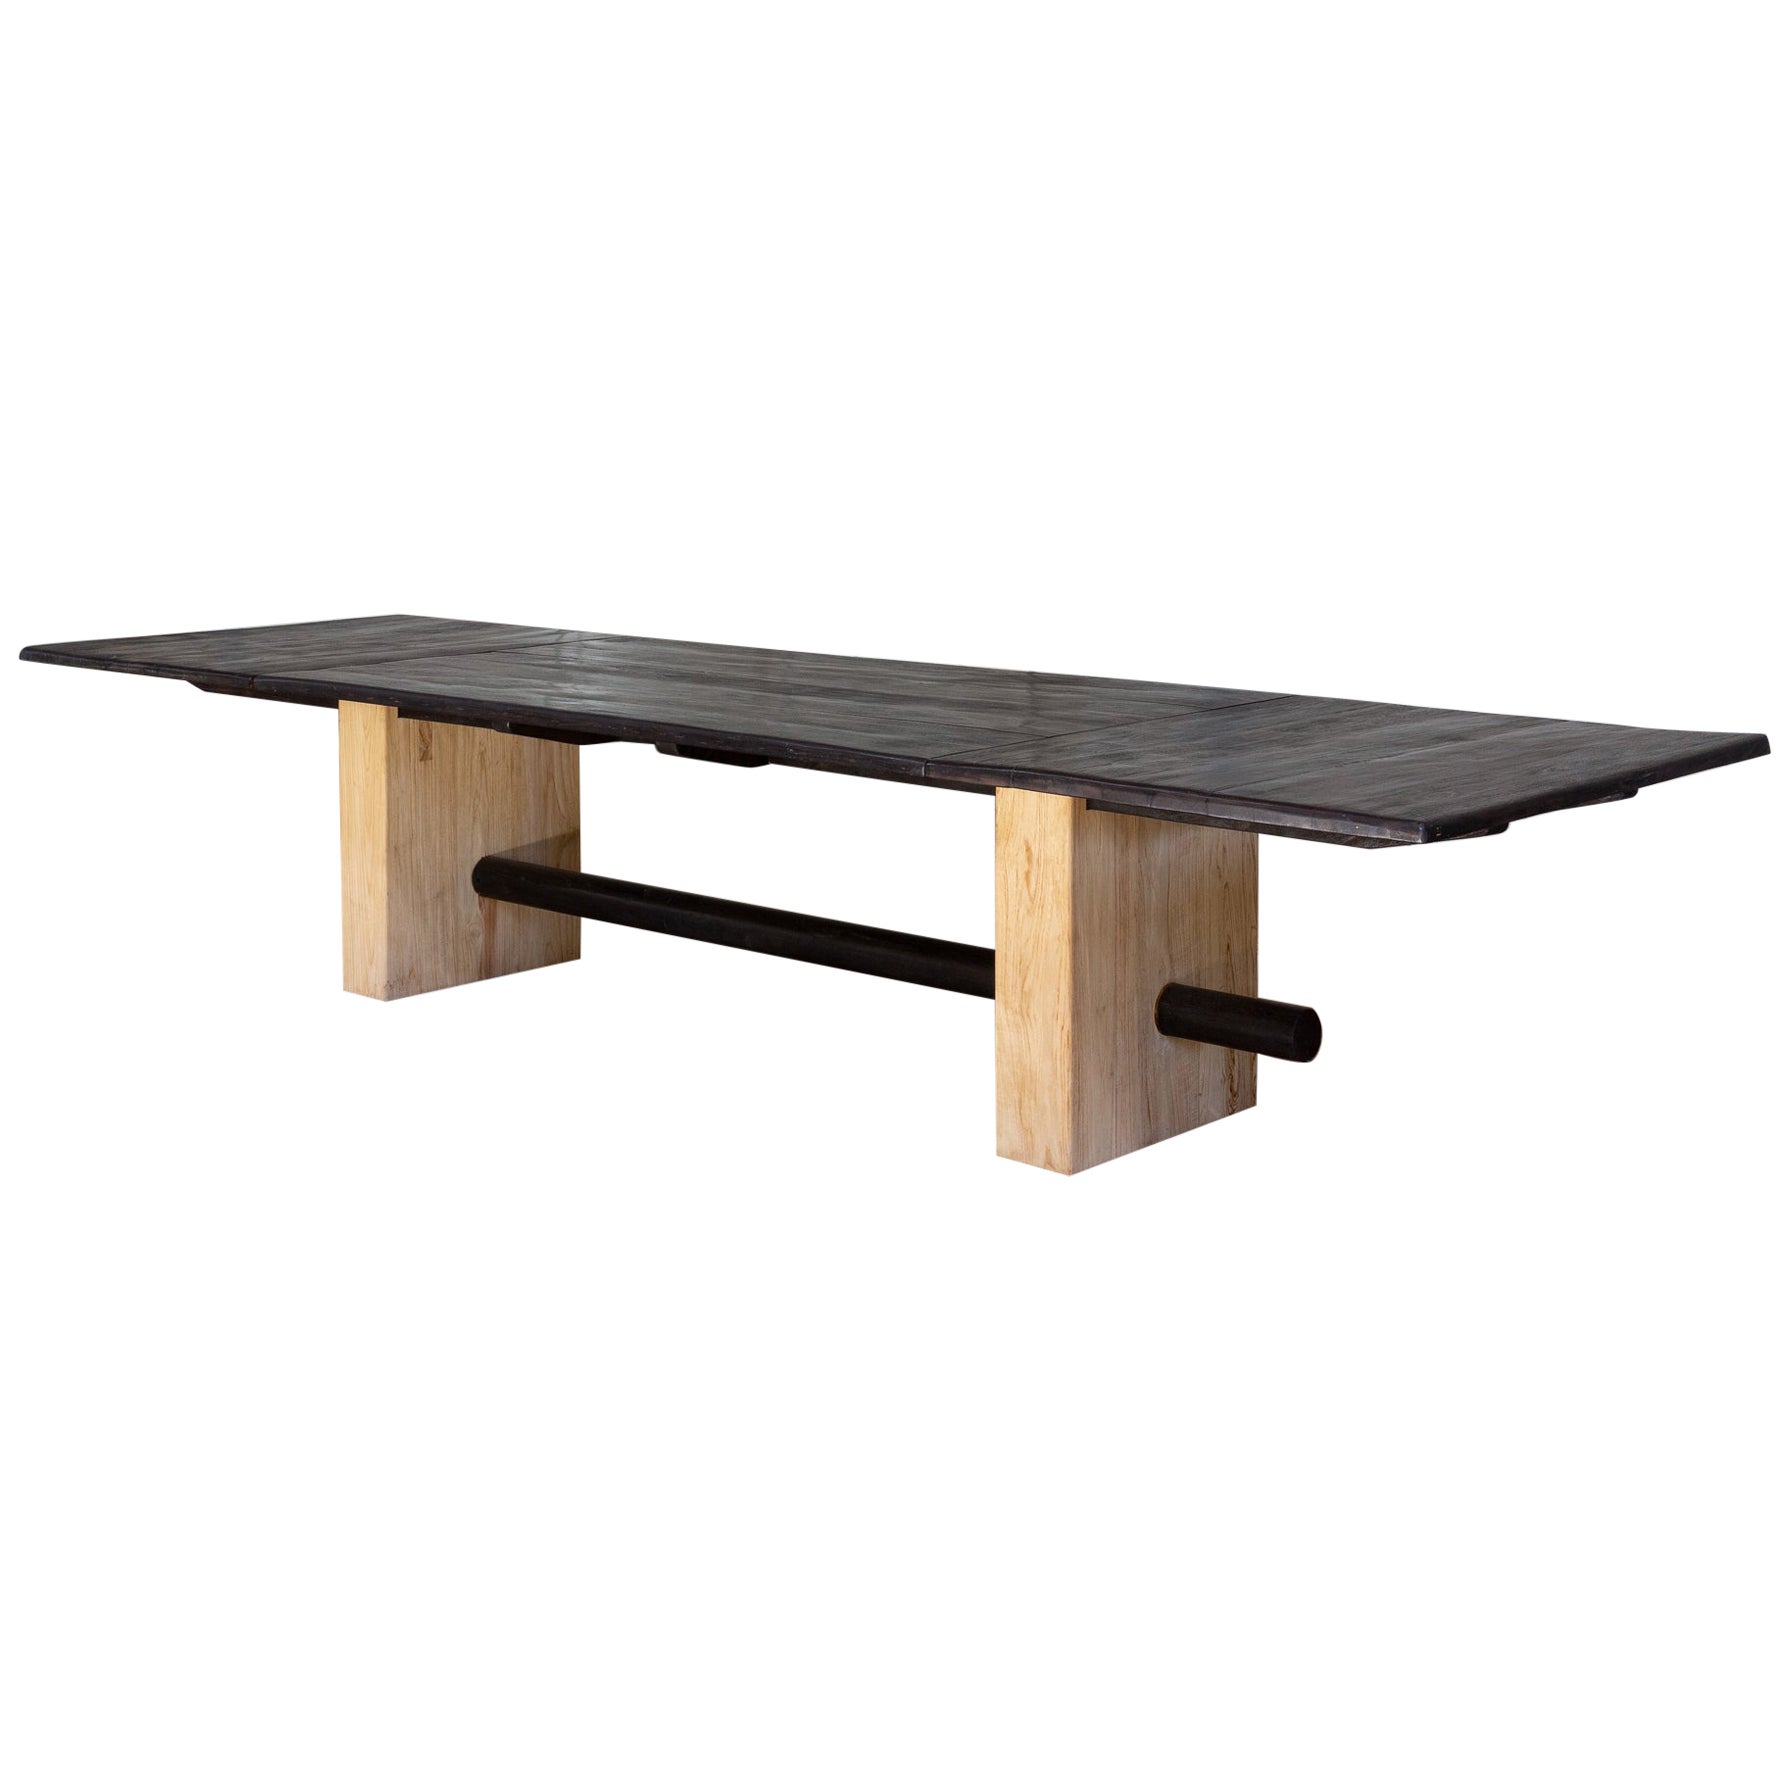 Modern Porto Dining Table by CEU Studio, Represented by Tuleste Factory